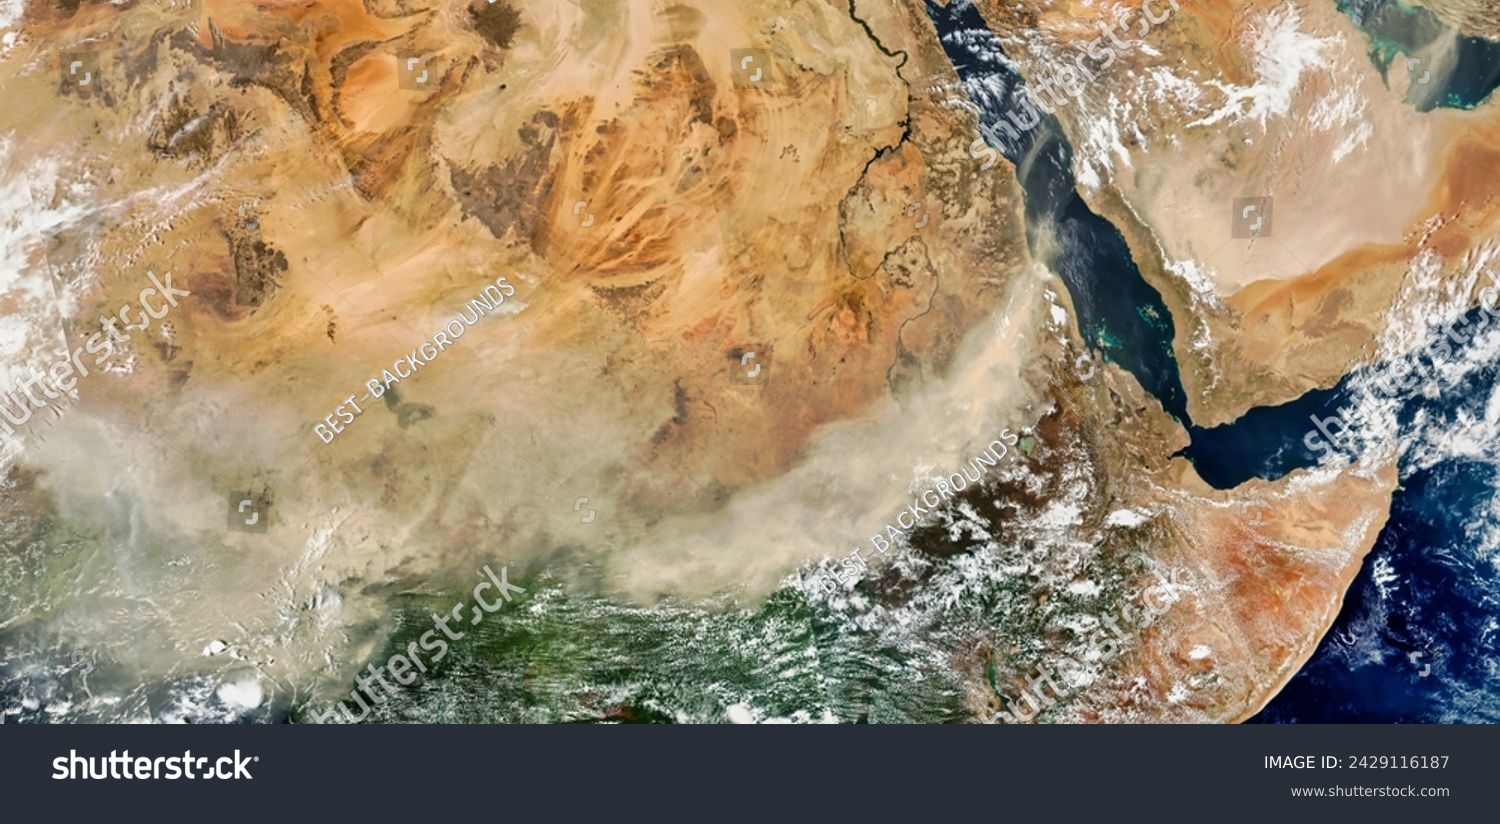 Dust storms across central Africa and the Arabian Peninsula. Dust storms across central Africa and the Arabian Peninsula. Elements of this image furnished by NASA. #2429116187